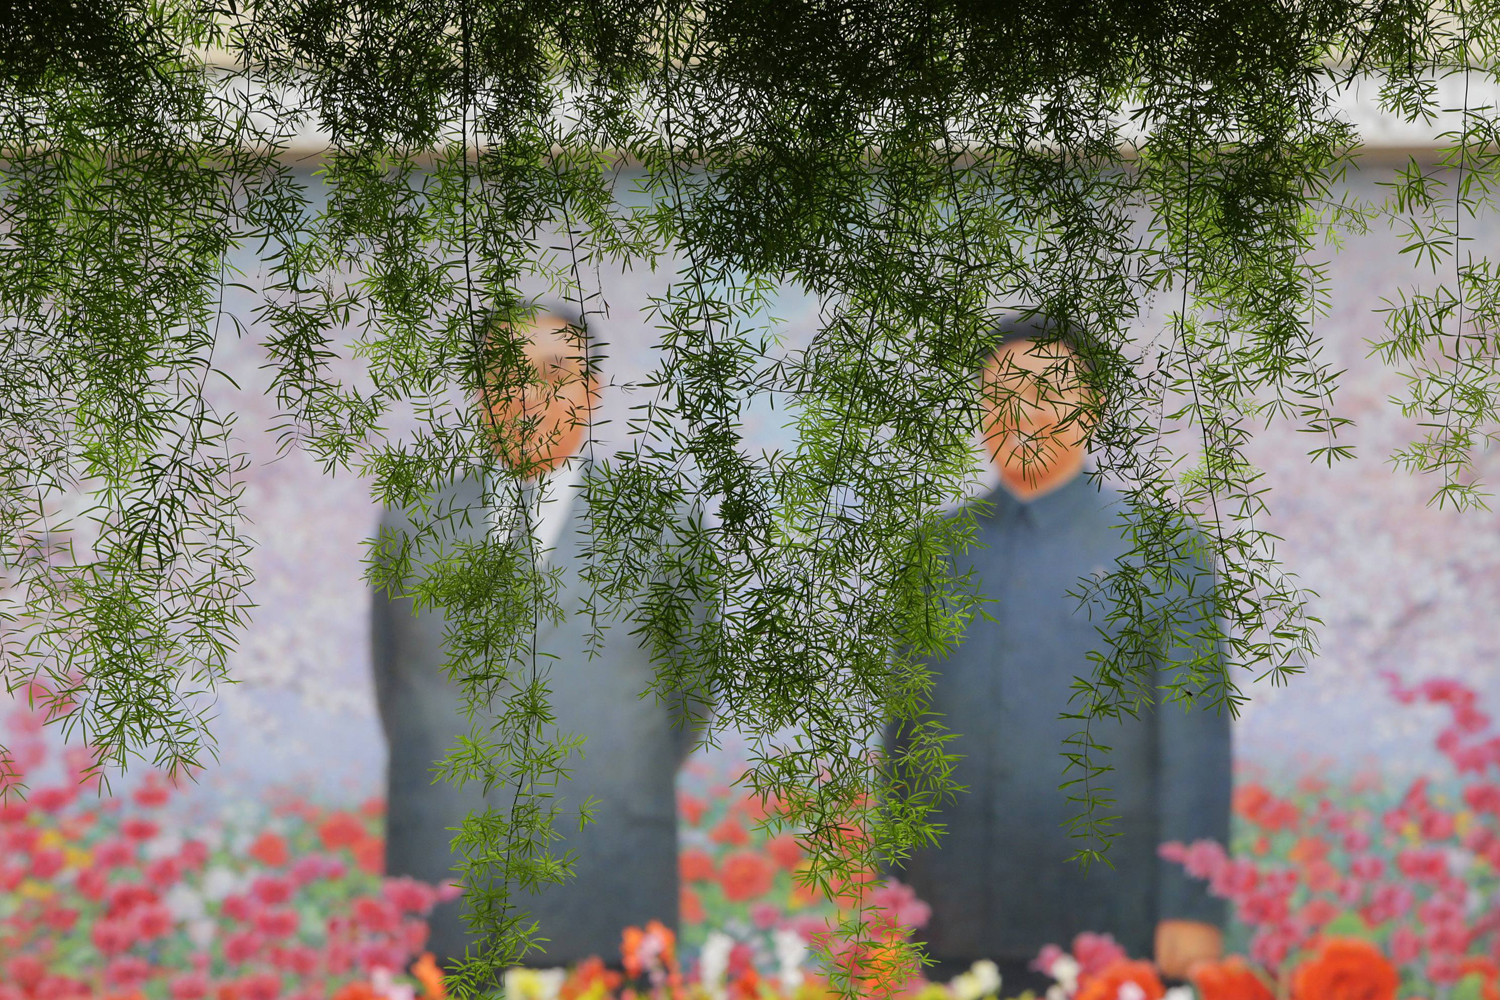 A painting featuring late North Korean leaders Kim Jong-il and Kim Il-sung is pictured at the Kimilsungia-Kimjongilia exhibition hall in Pyongyang